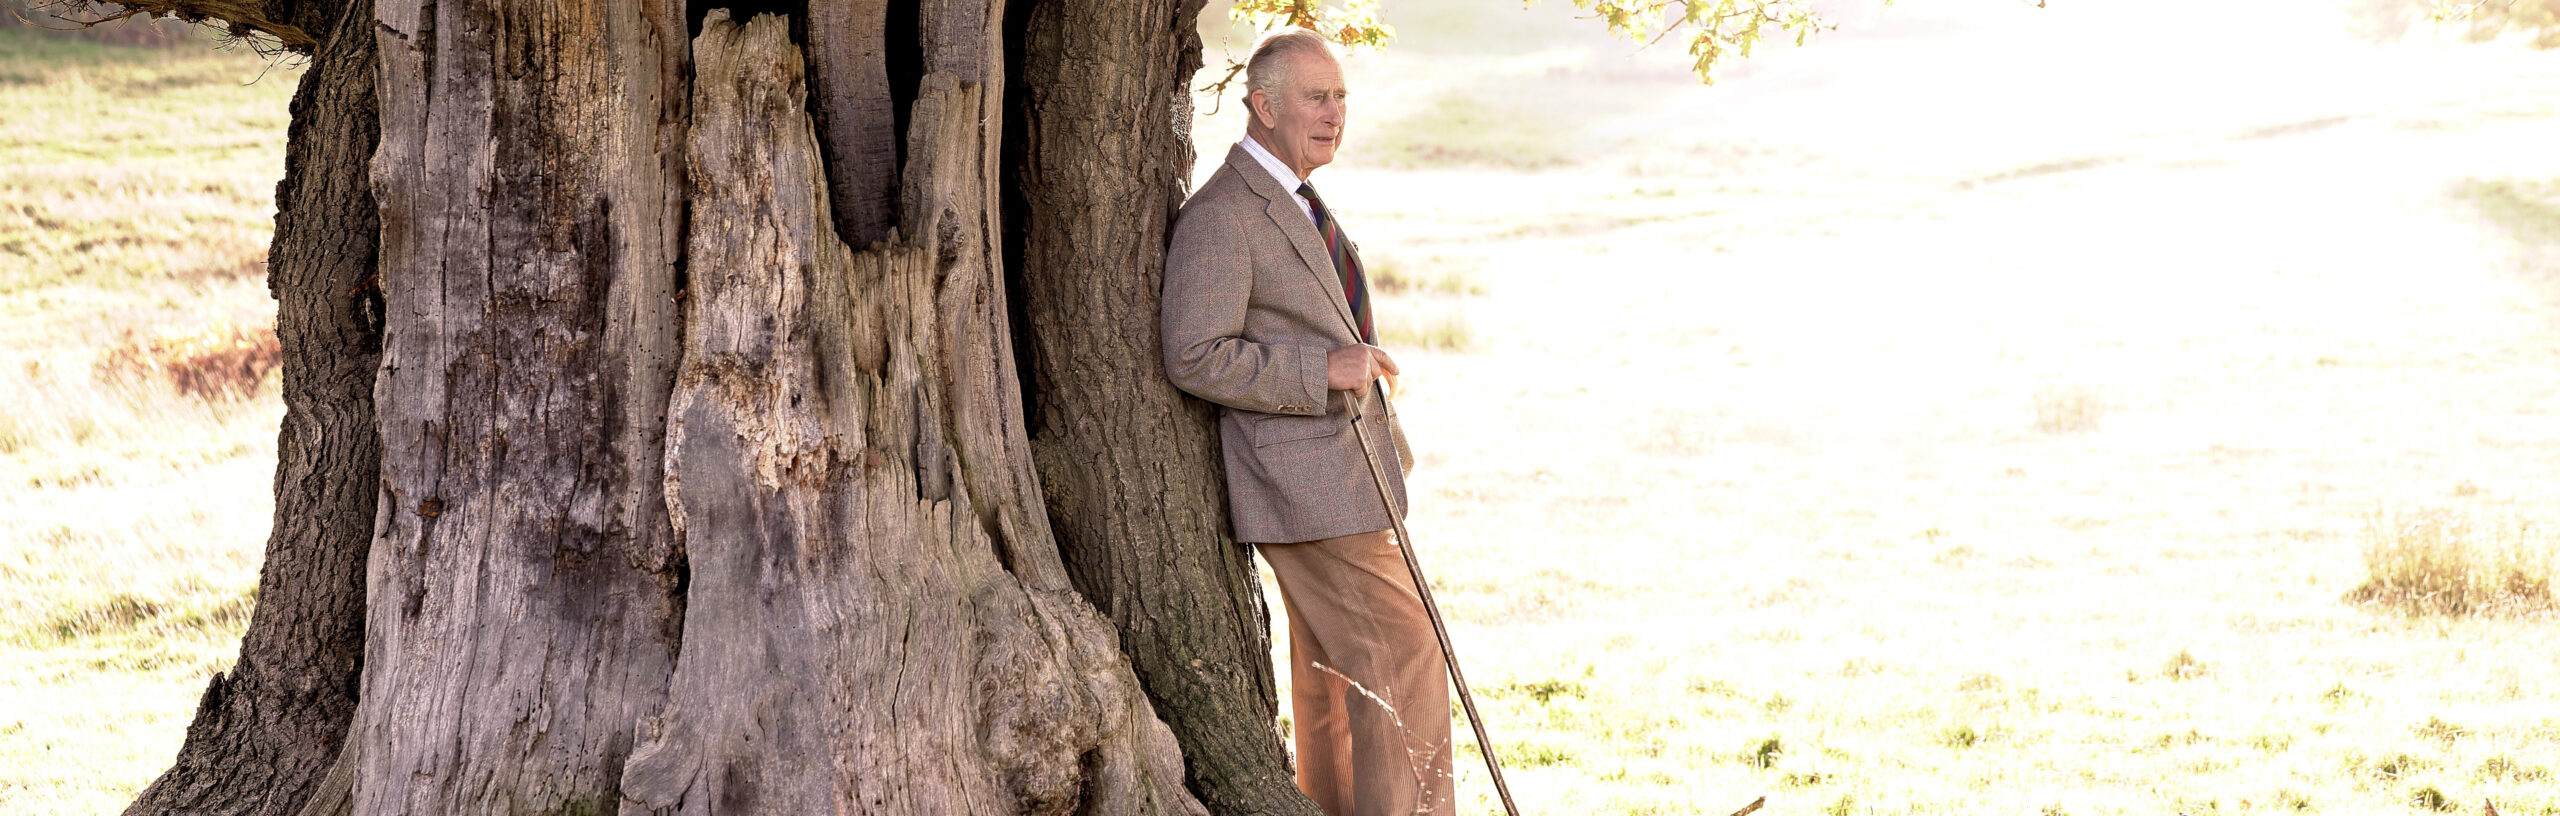 His Majesty King Charles III, Ranger of Windsor Great Park, leaning against an oak tree.